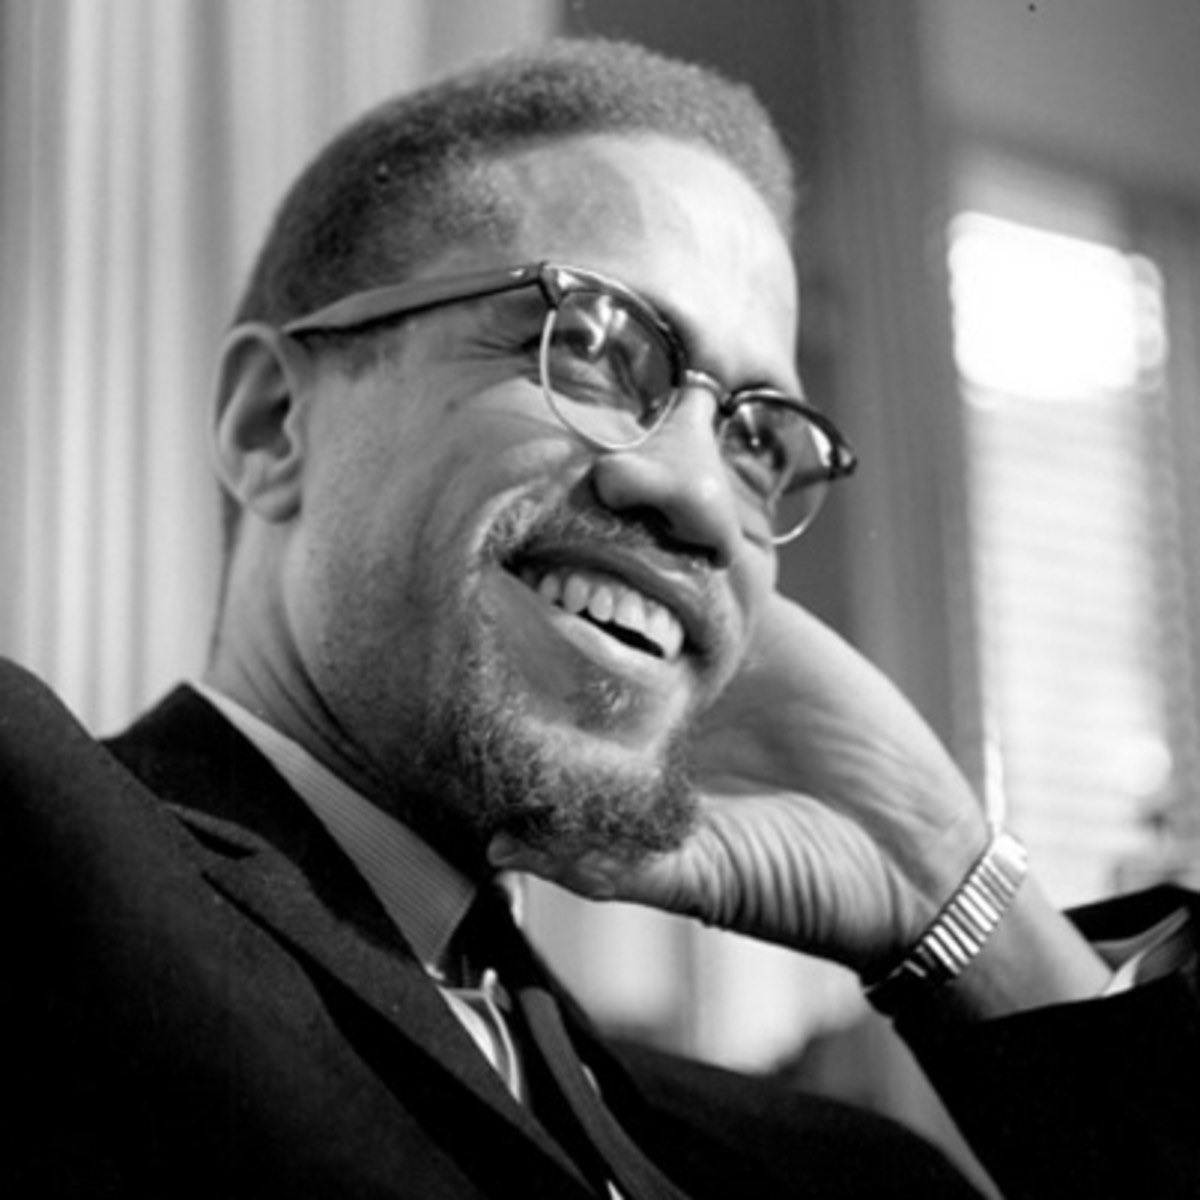 Malcolm X also known as El-Hajj Malik El-Shabazz was born on May 19th 1925 in Omaha, Nebraska as Malcolm Little His father was a baptist speaker who was heavily influenced by Marcus Garvey and his Pan African views. Because of the Ku Klux Klan his family relocated to Michigan.